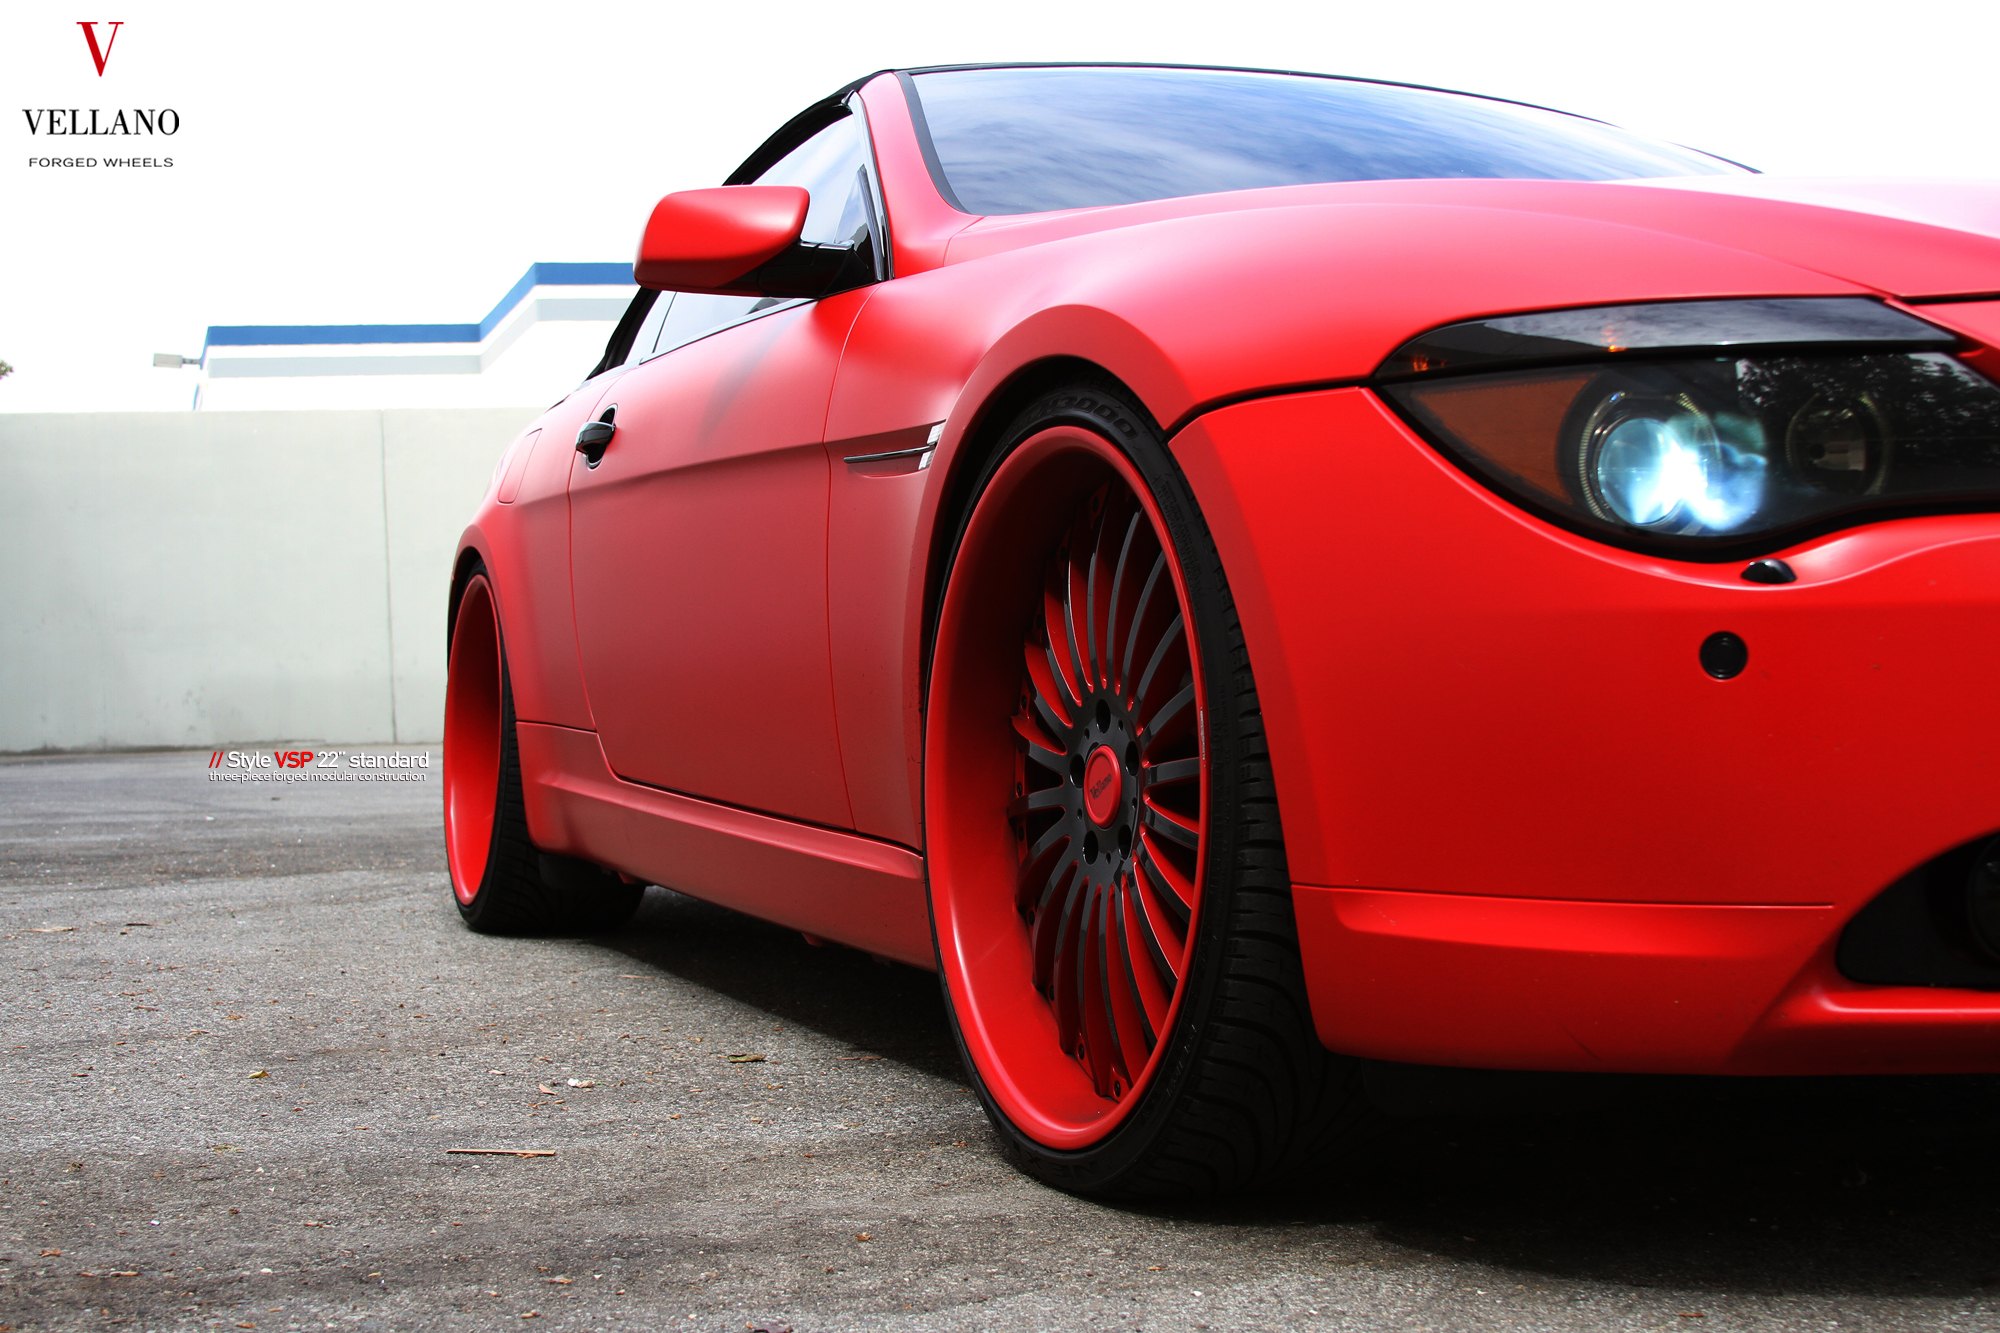 Aftermarket Side Skirts on Red Matte BMW 6-Series - Photo by Vellano